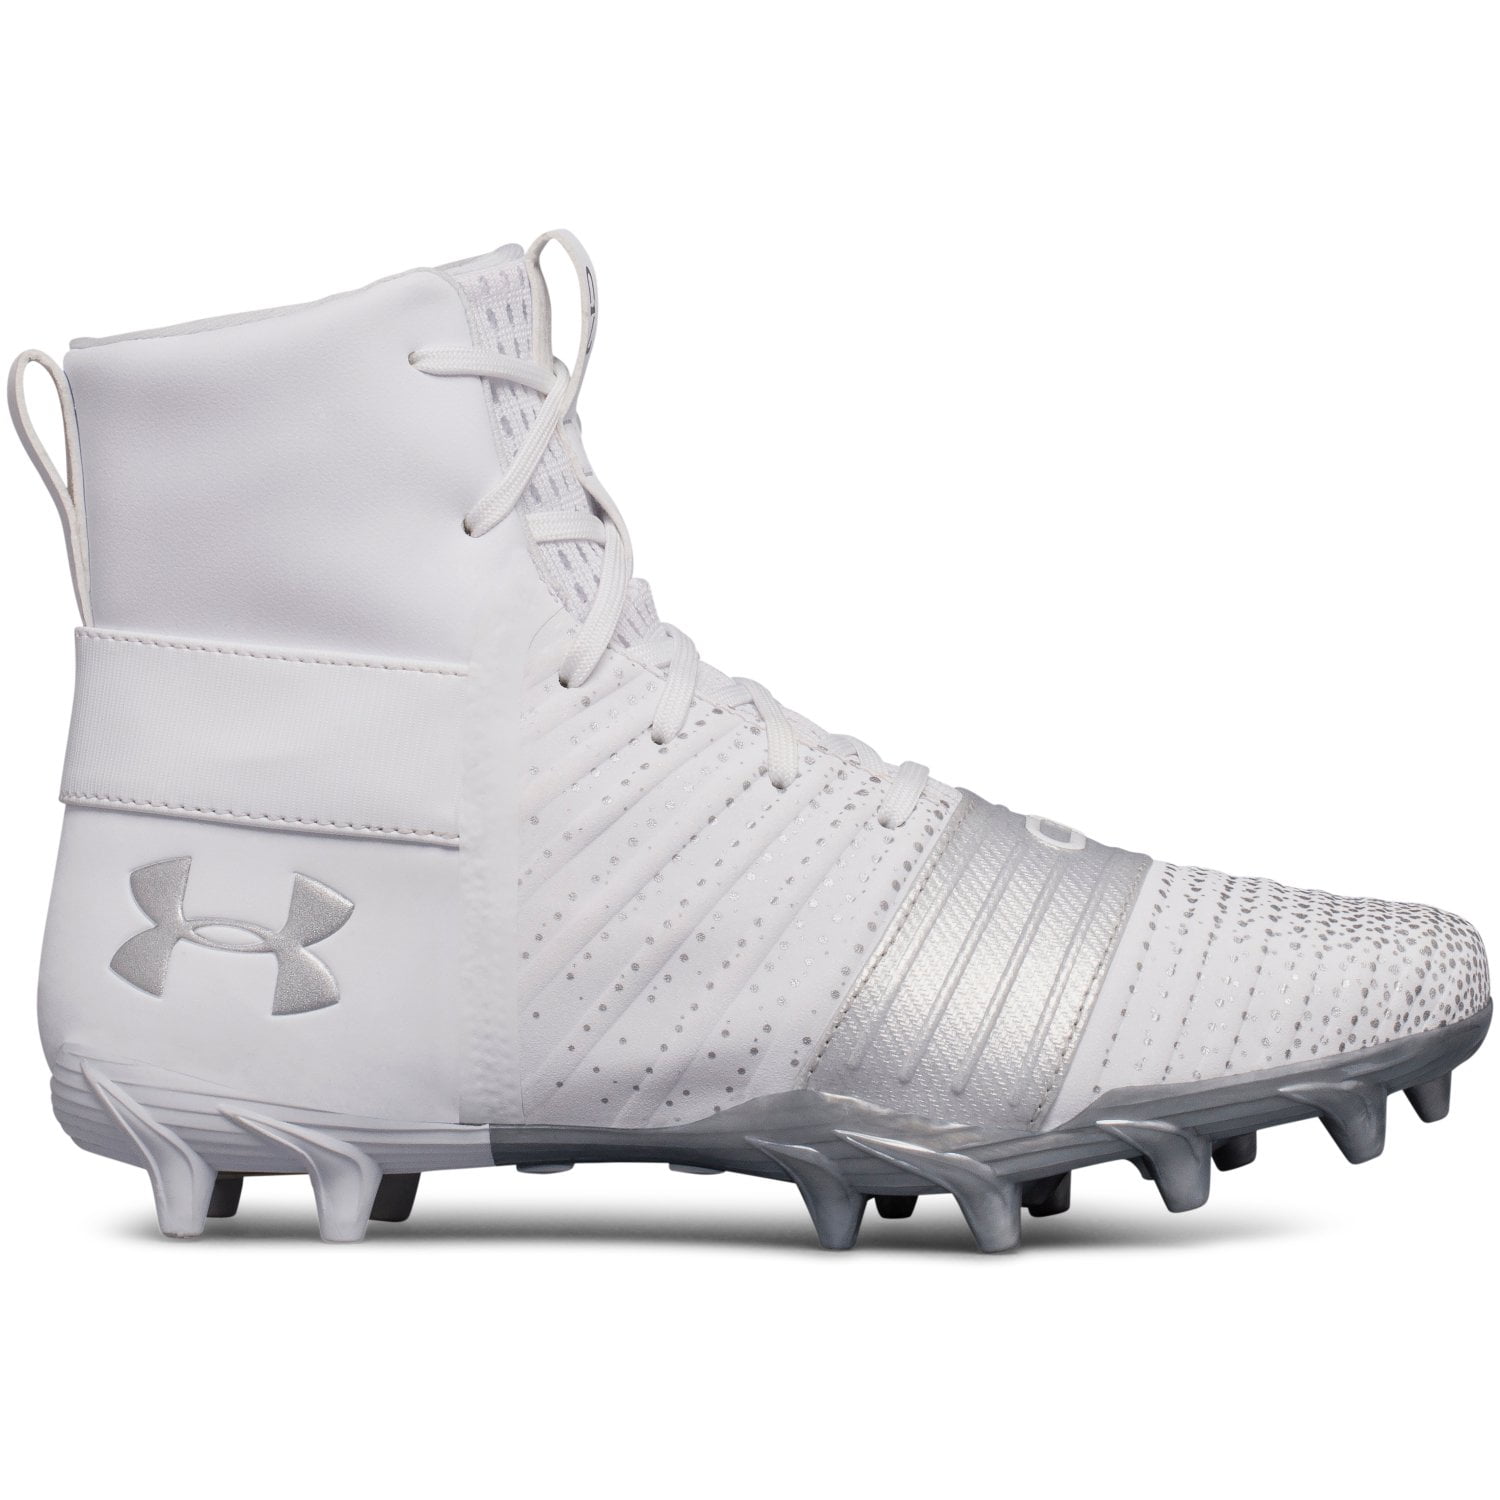 under armour 8 inch boots